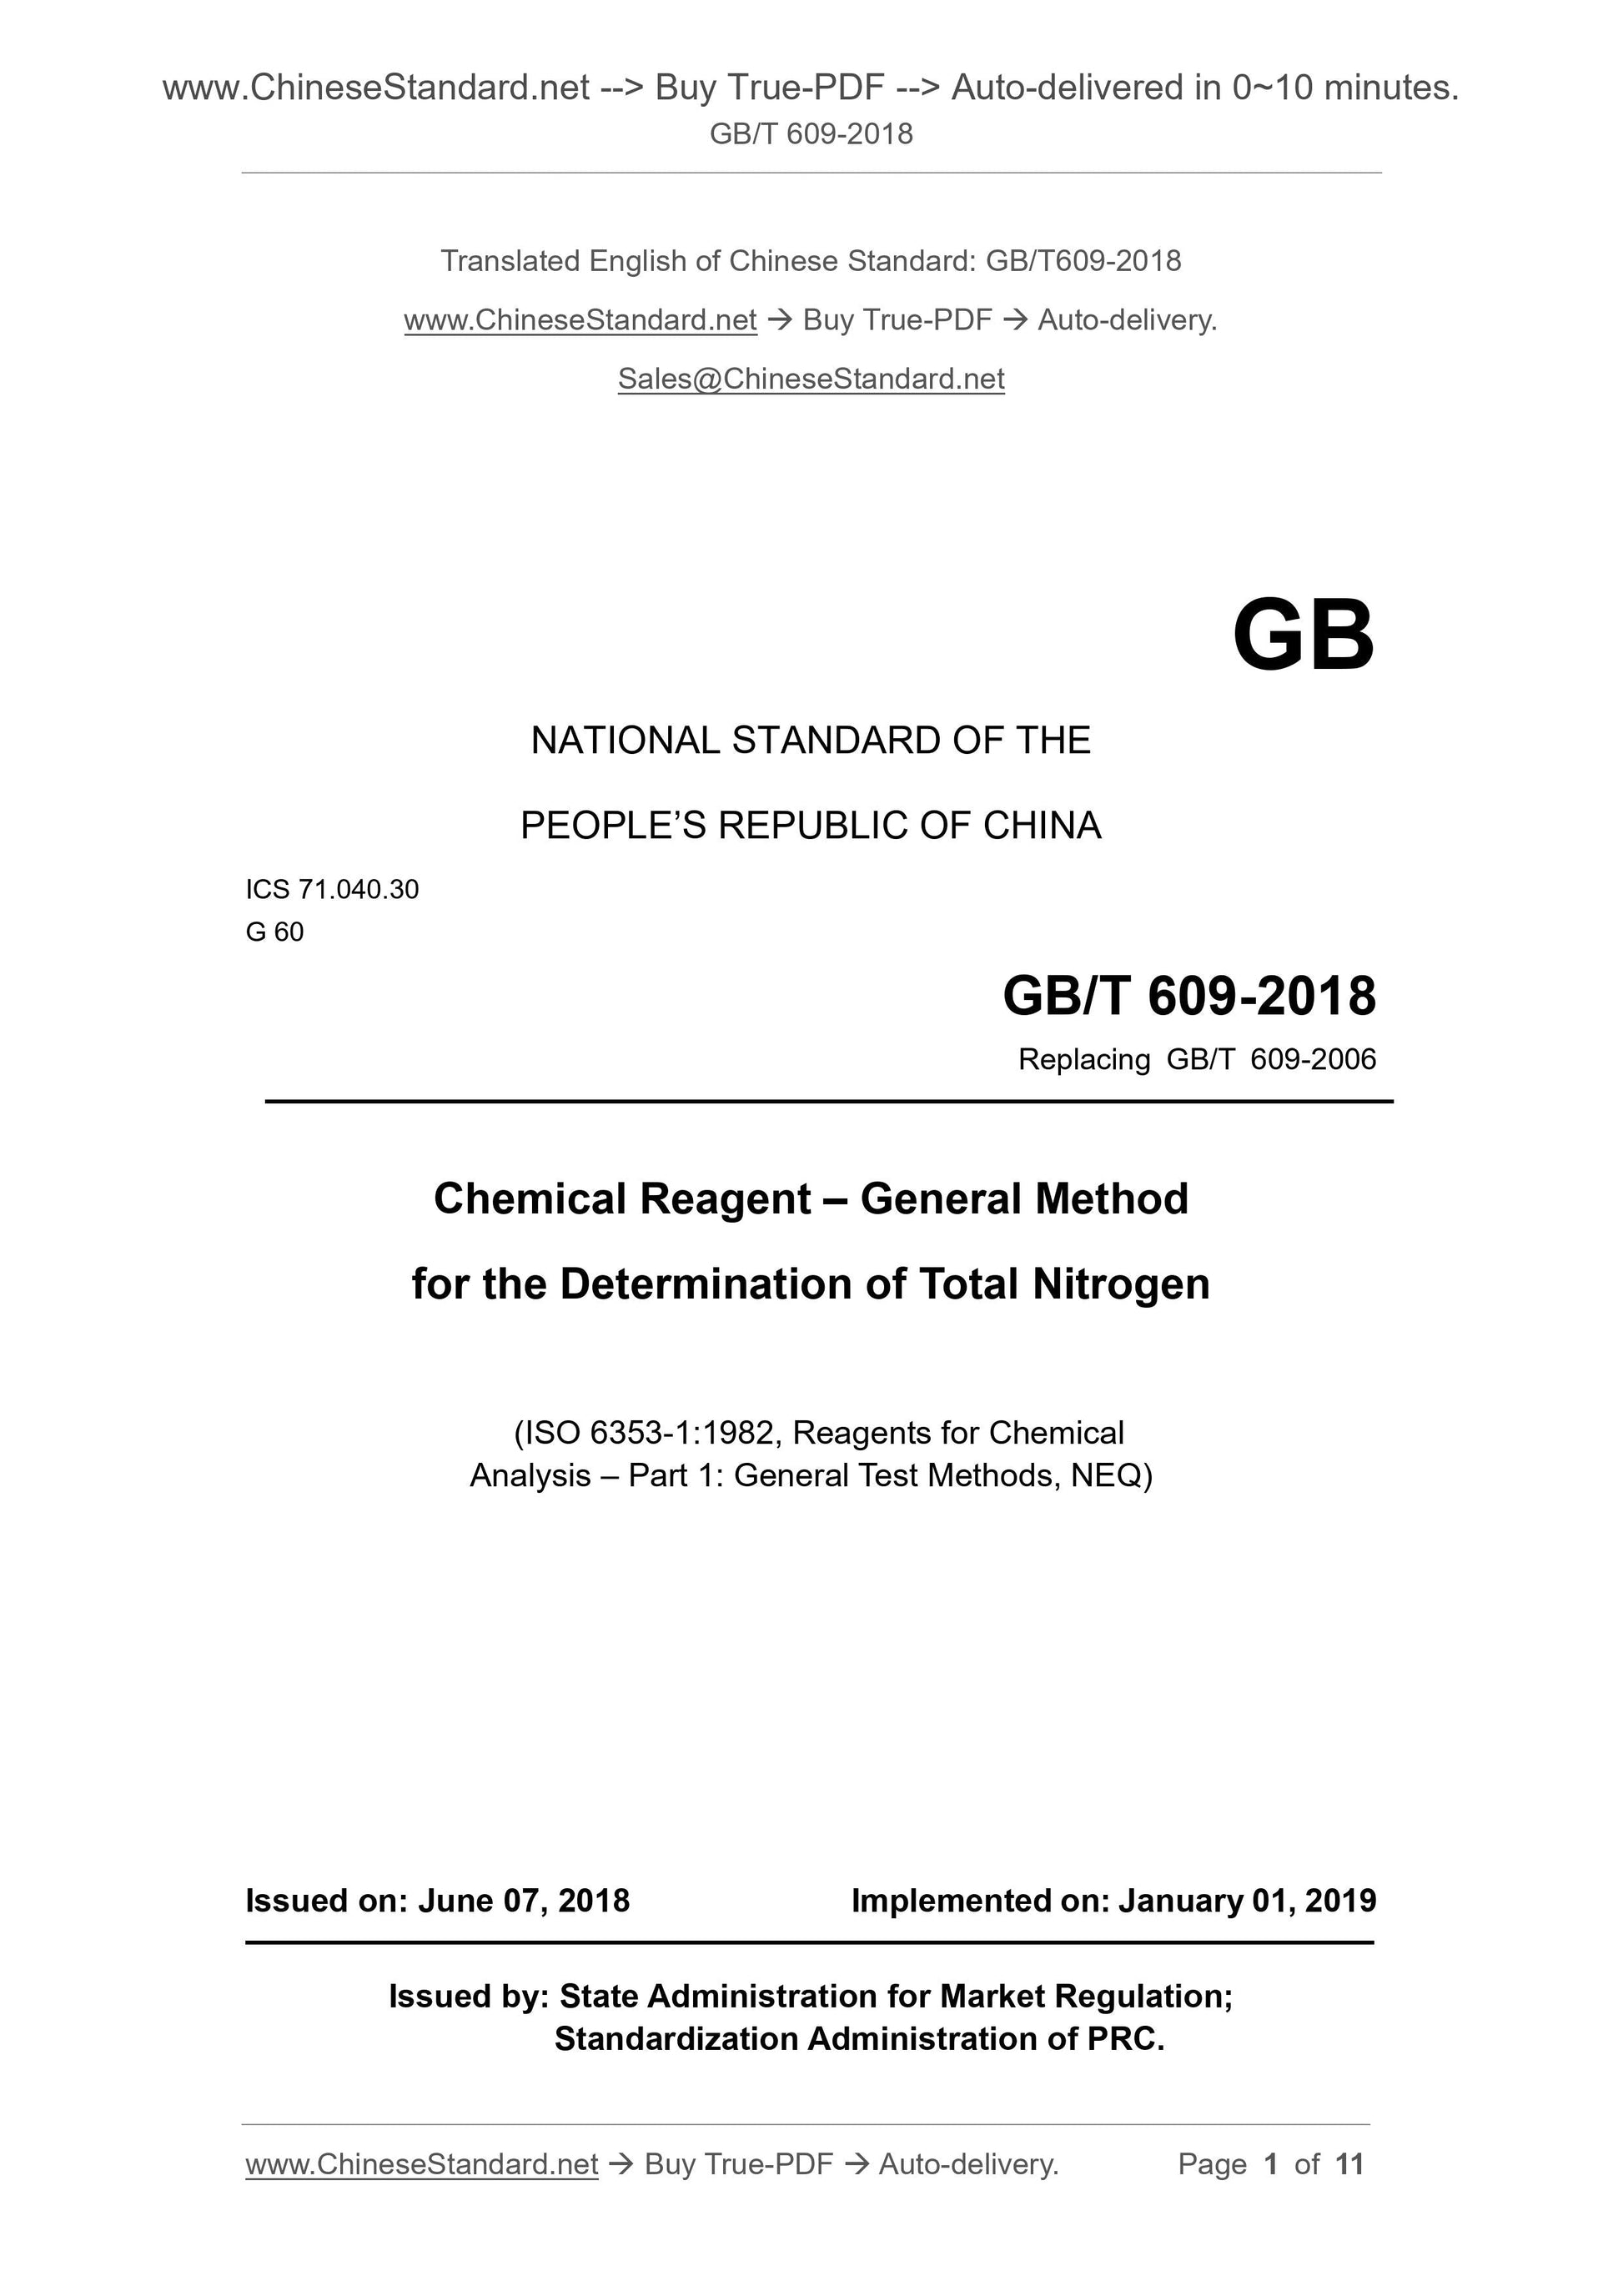 GB/T 609-2018 Page 1